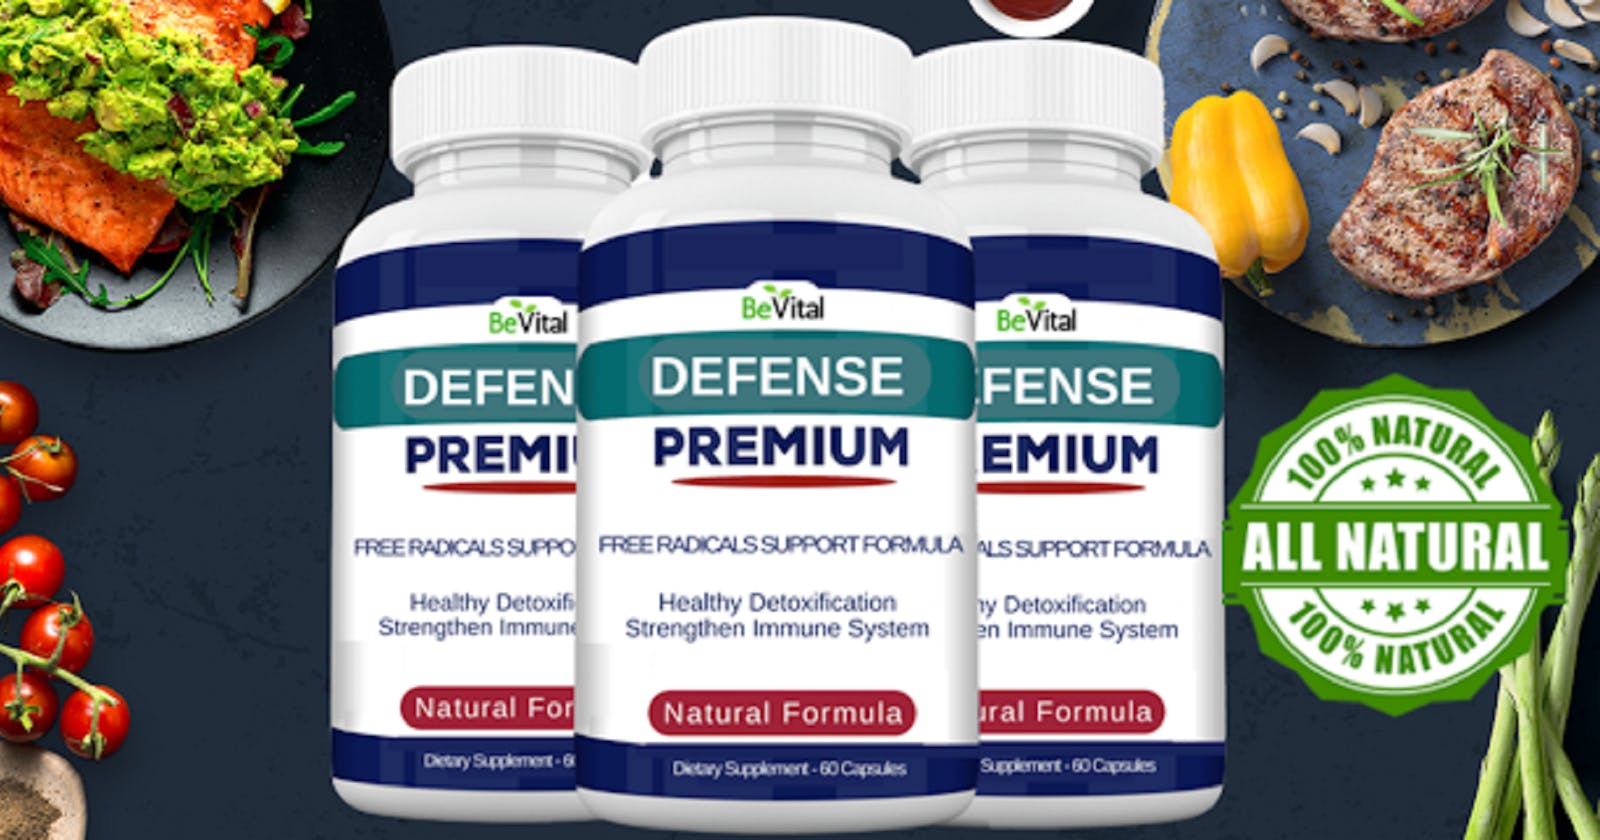 Bevital Defense Premium Is It Safe Or Trusted? (2022 Reviews) Side Effects & Price?